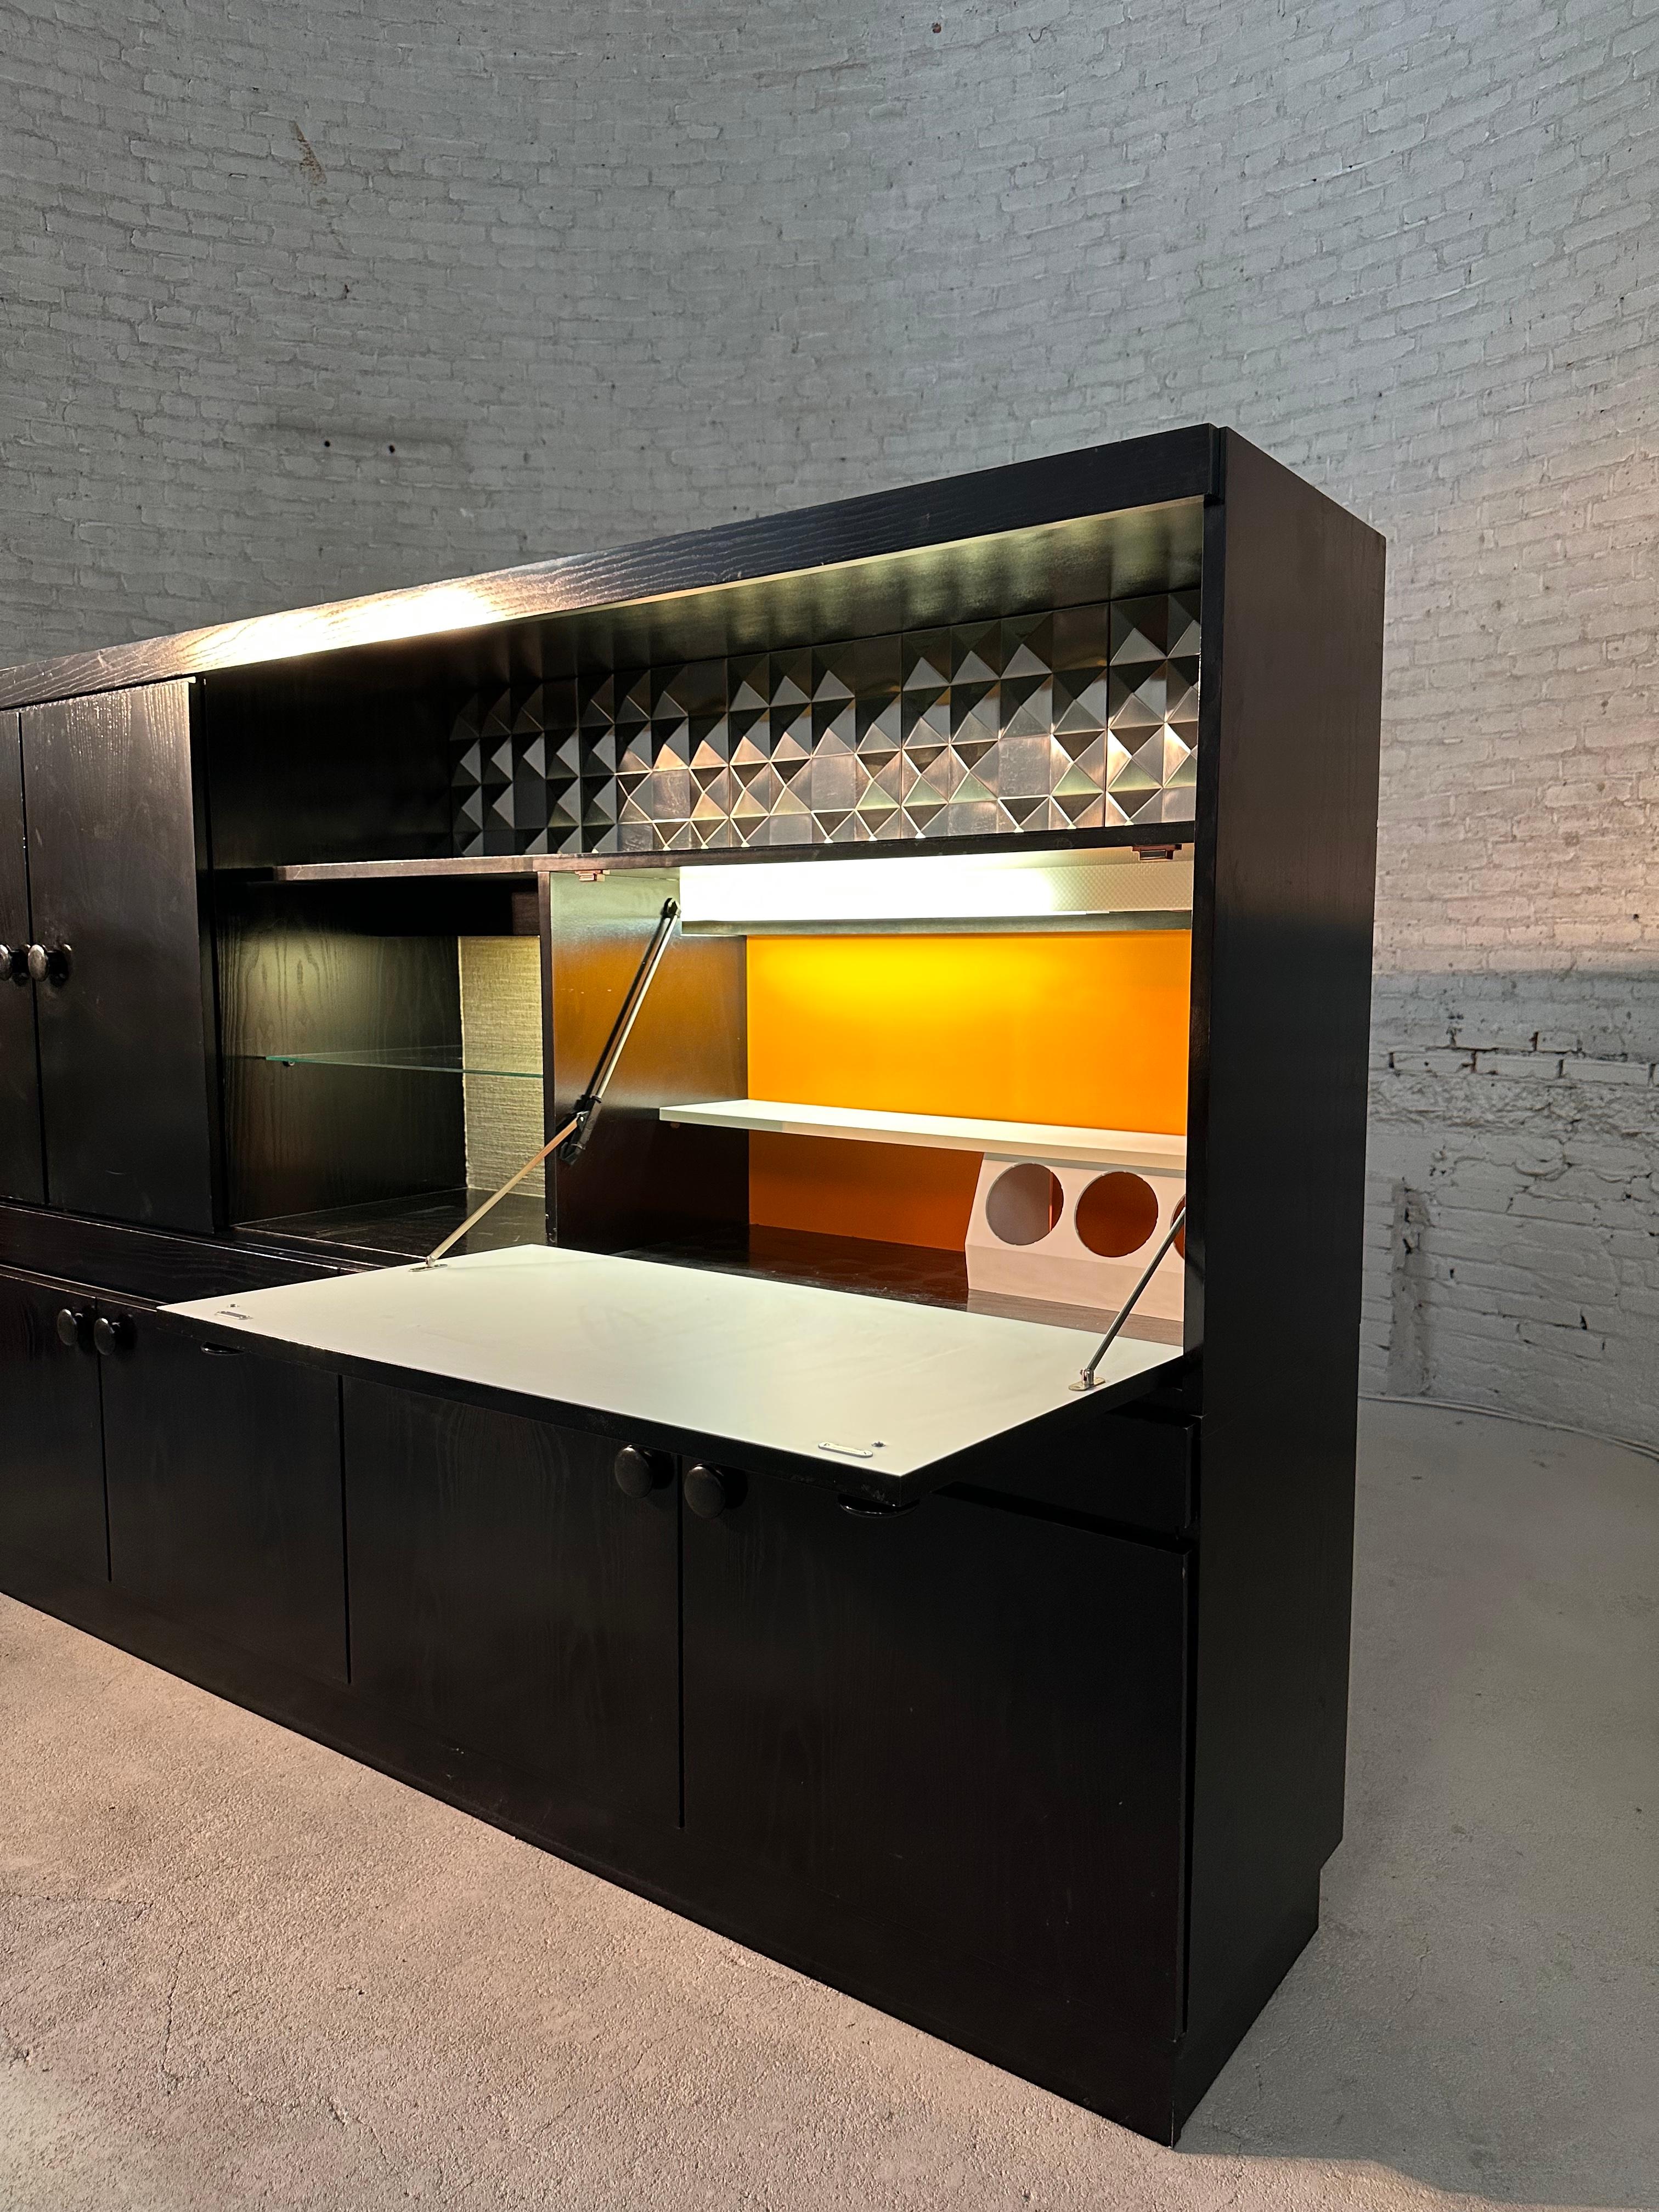 Make a statement with this XXL bar cabinet that looks like it time traveled straight out of the '80s! With four connecting drawers and plenty of space to store a liquor store.

This graphic cabinet made of black pinewood and aluminium is a fun and